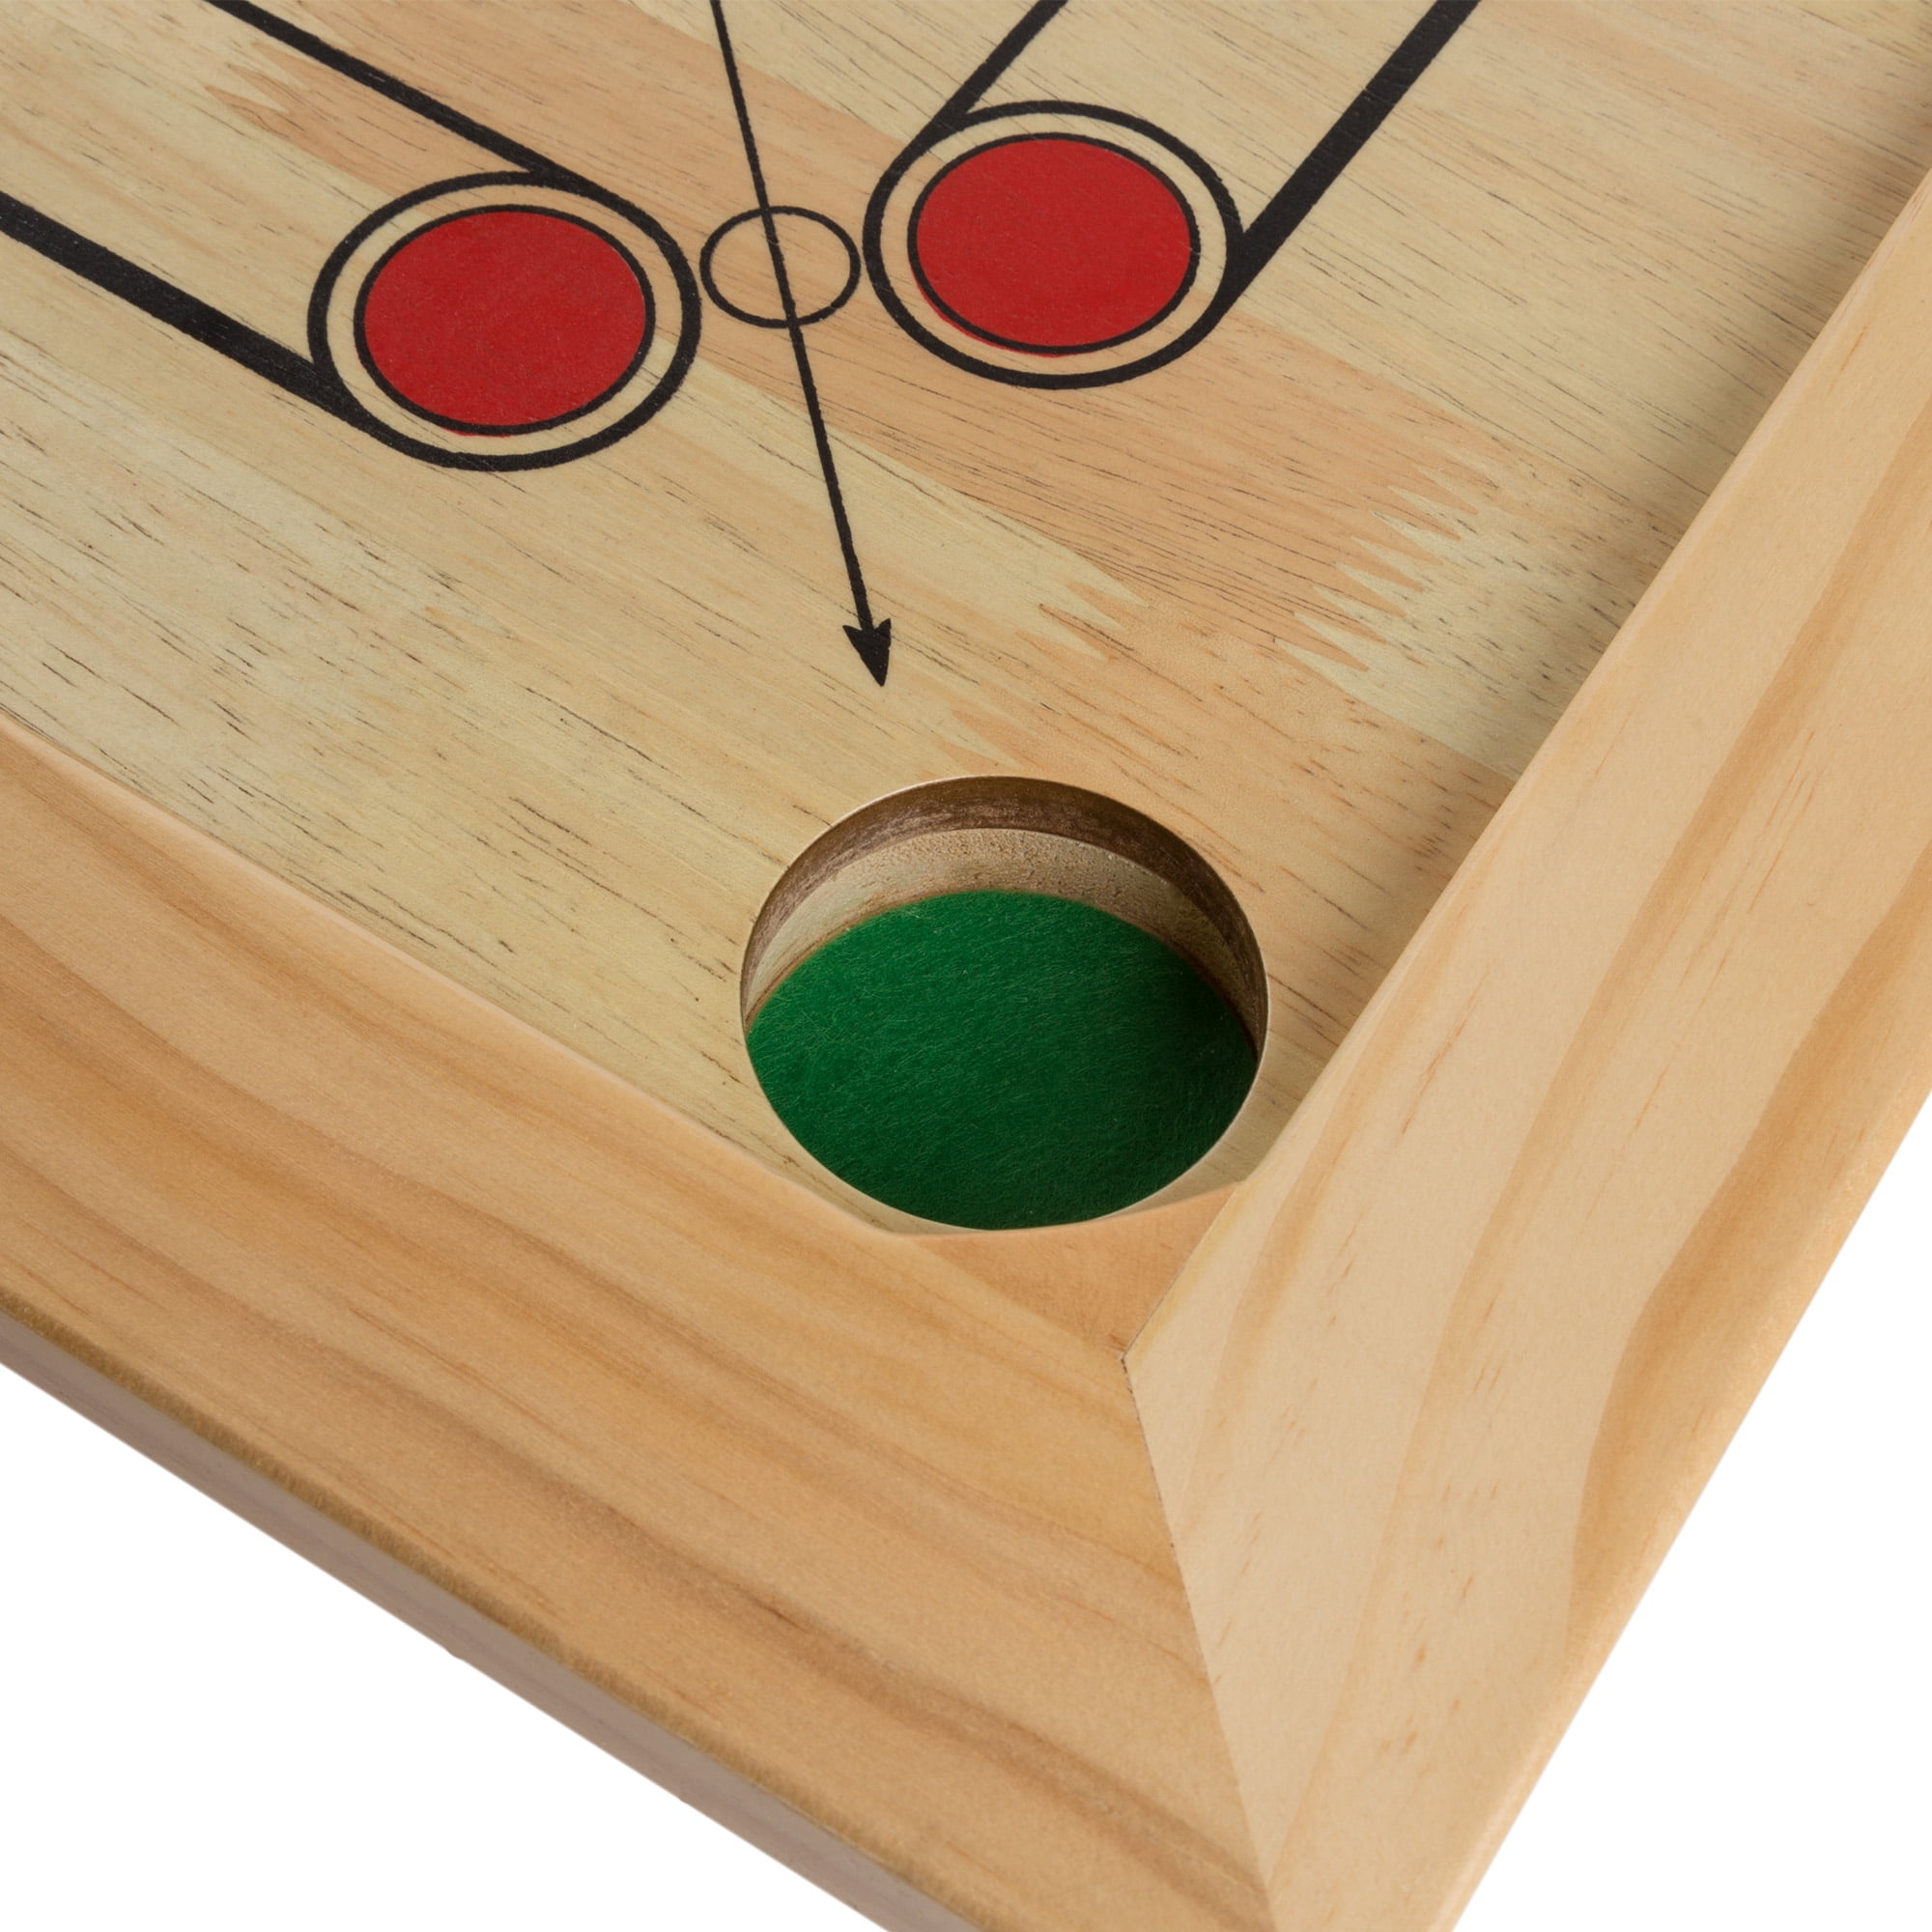 FREE SHIPPING Details about   Carrom Board Board Game CARROM COIN 